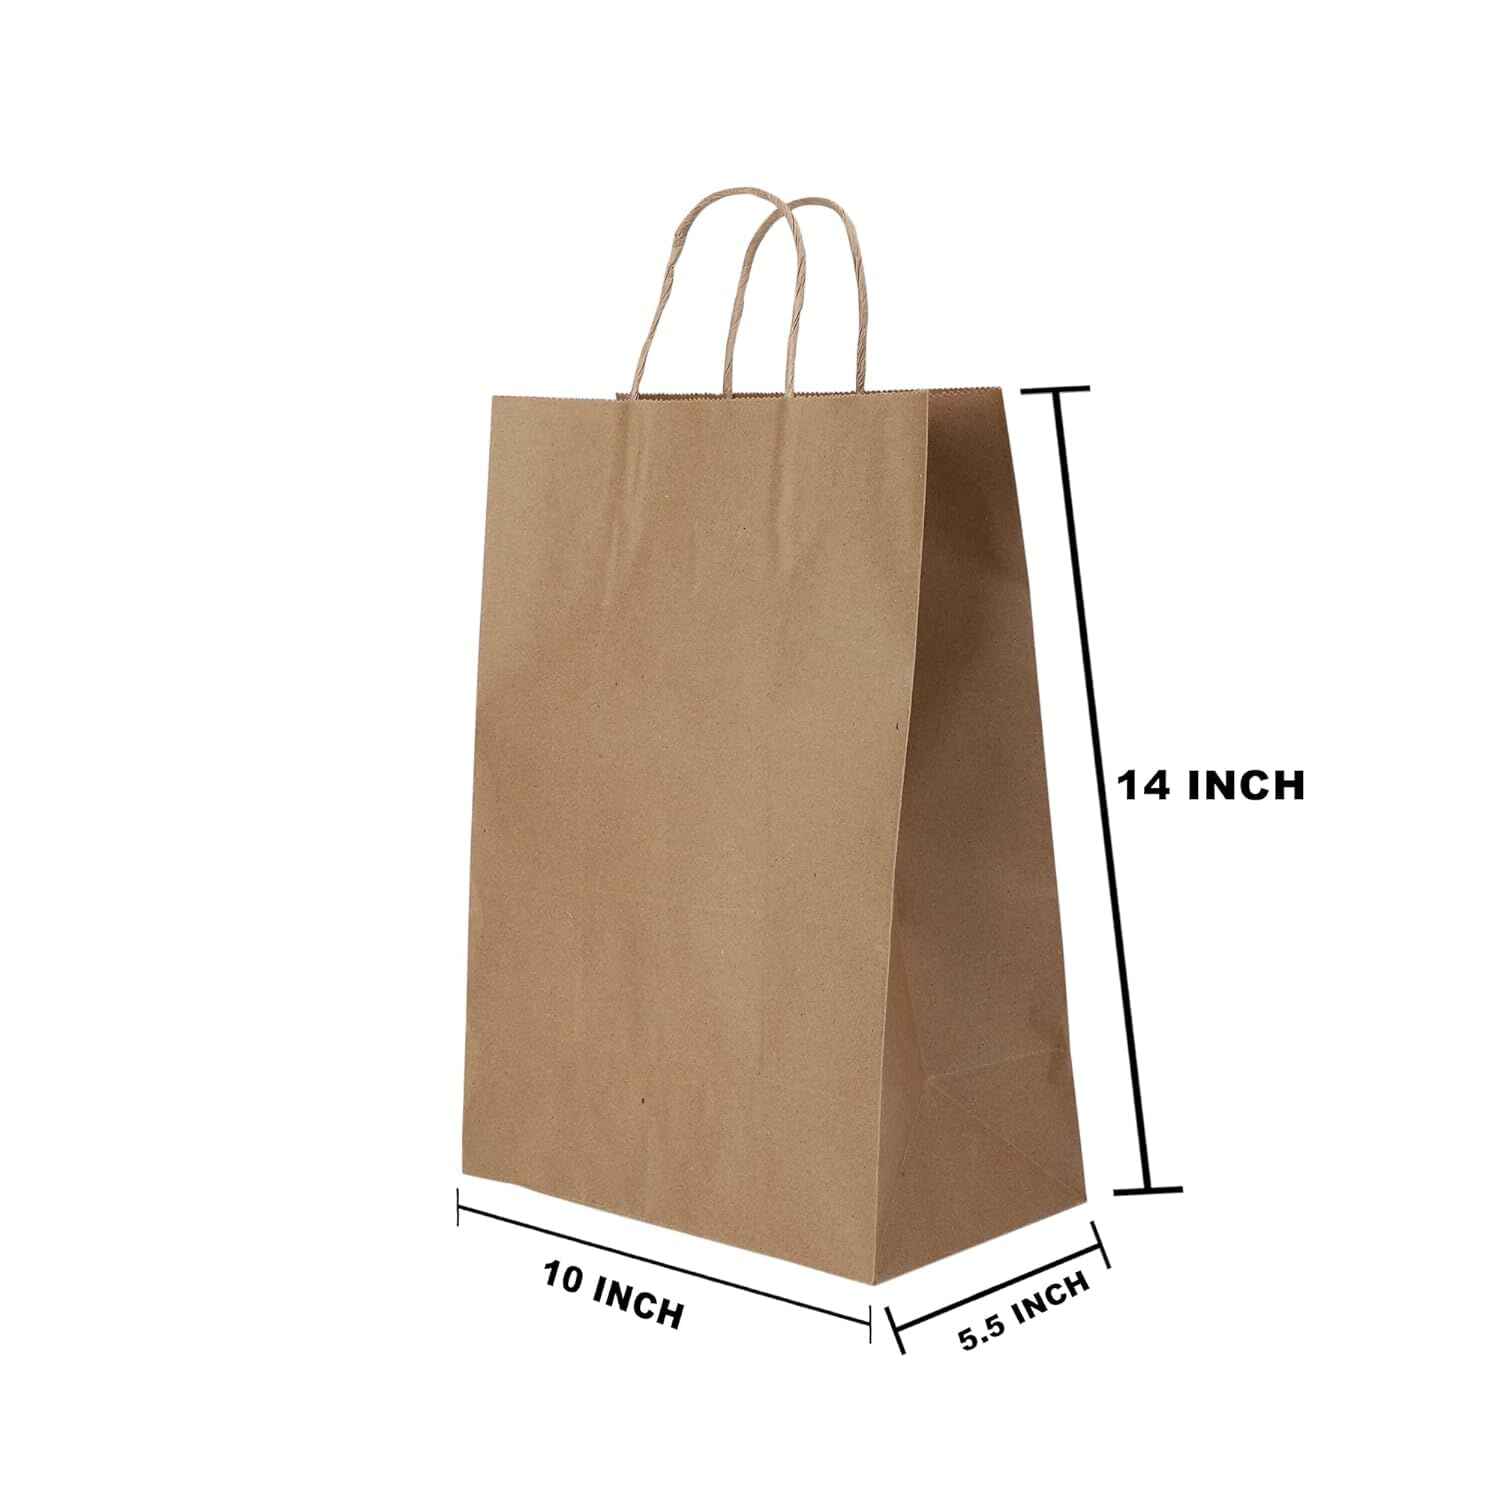 SAI BAGAVATH FAMILY MART Brown Kraft Paper Carry/Gift/Cloth/Grocery Recycled Eco Friendly Bags with handles - 10 * 5.5 * 14 inches, Pack of 20 pcs